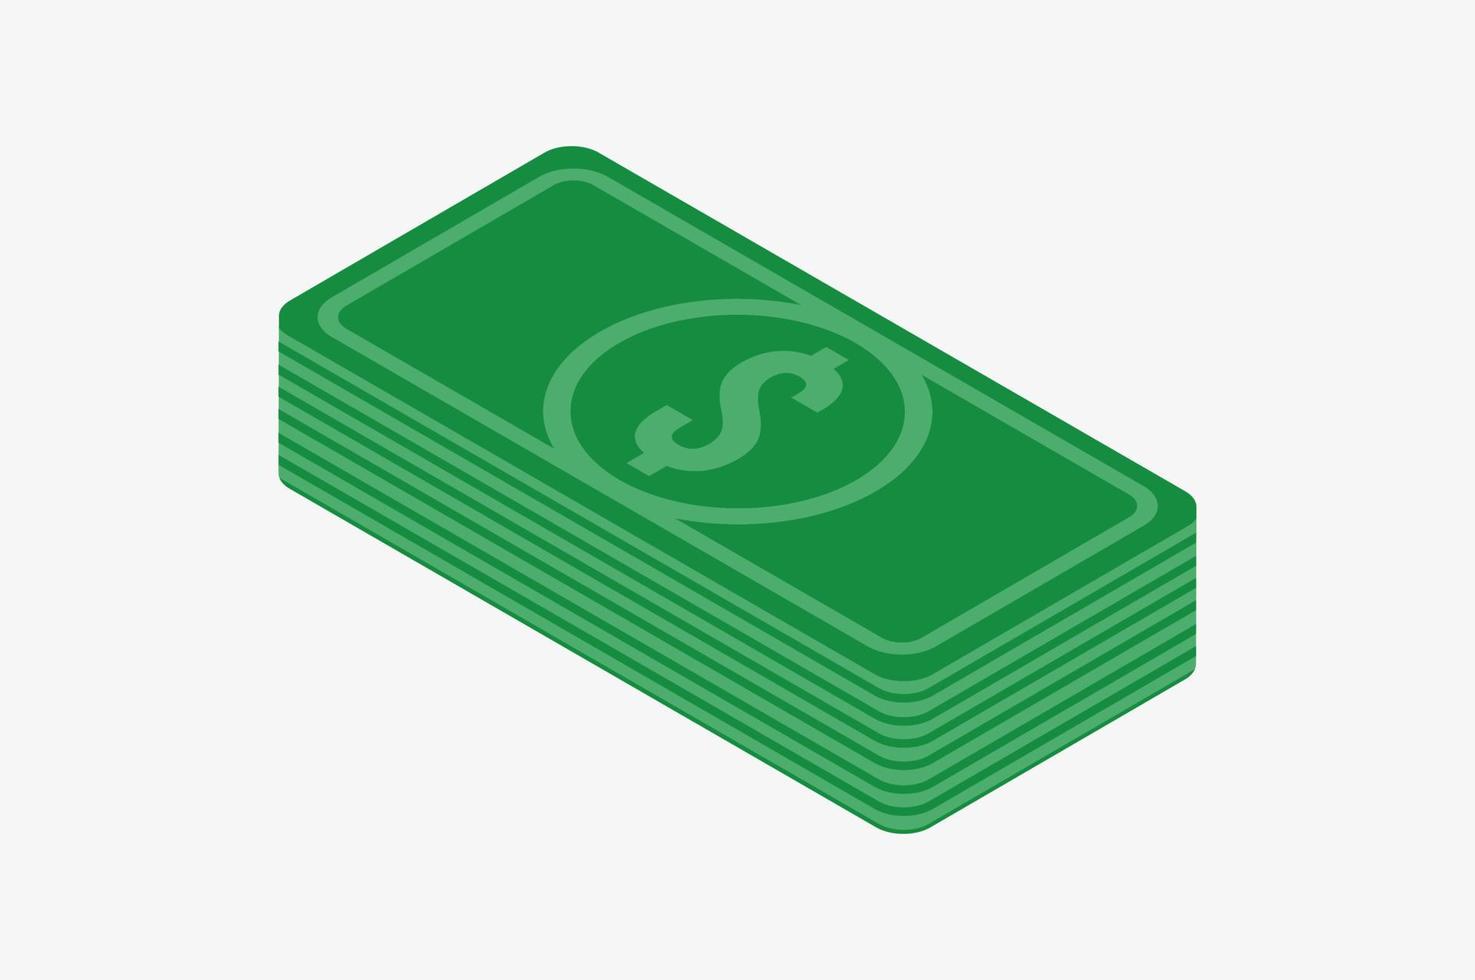 Isometric stack of cash. Vector illustration. Pile of money. Money icon in isometric style